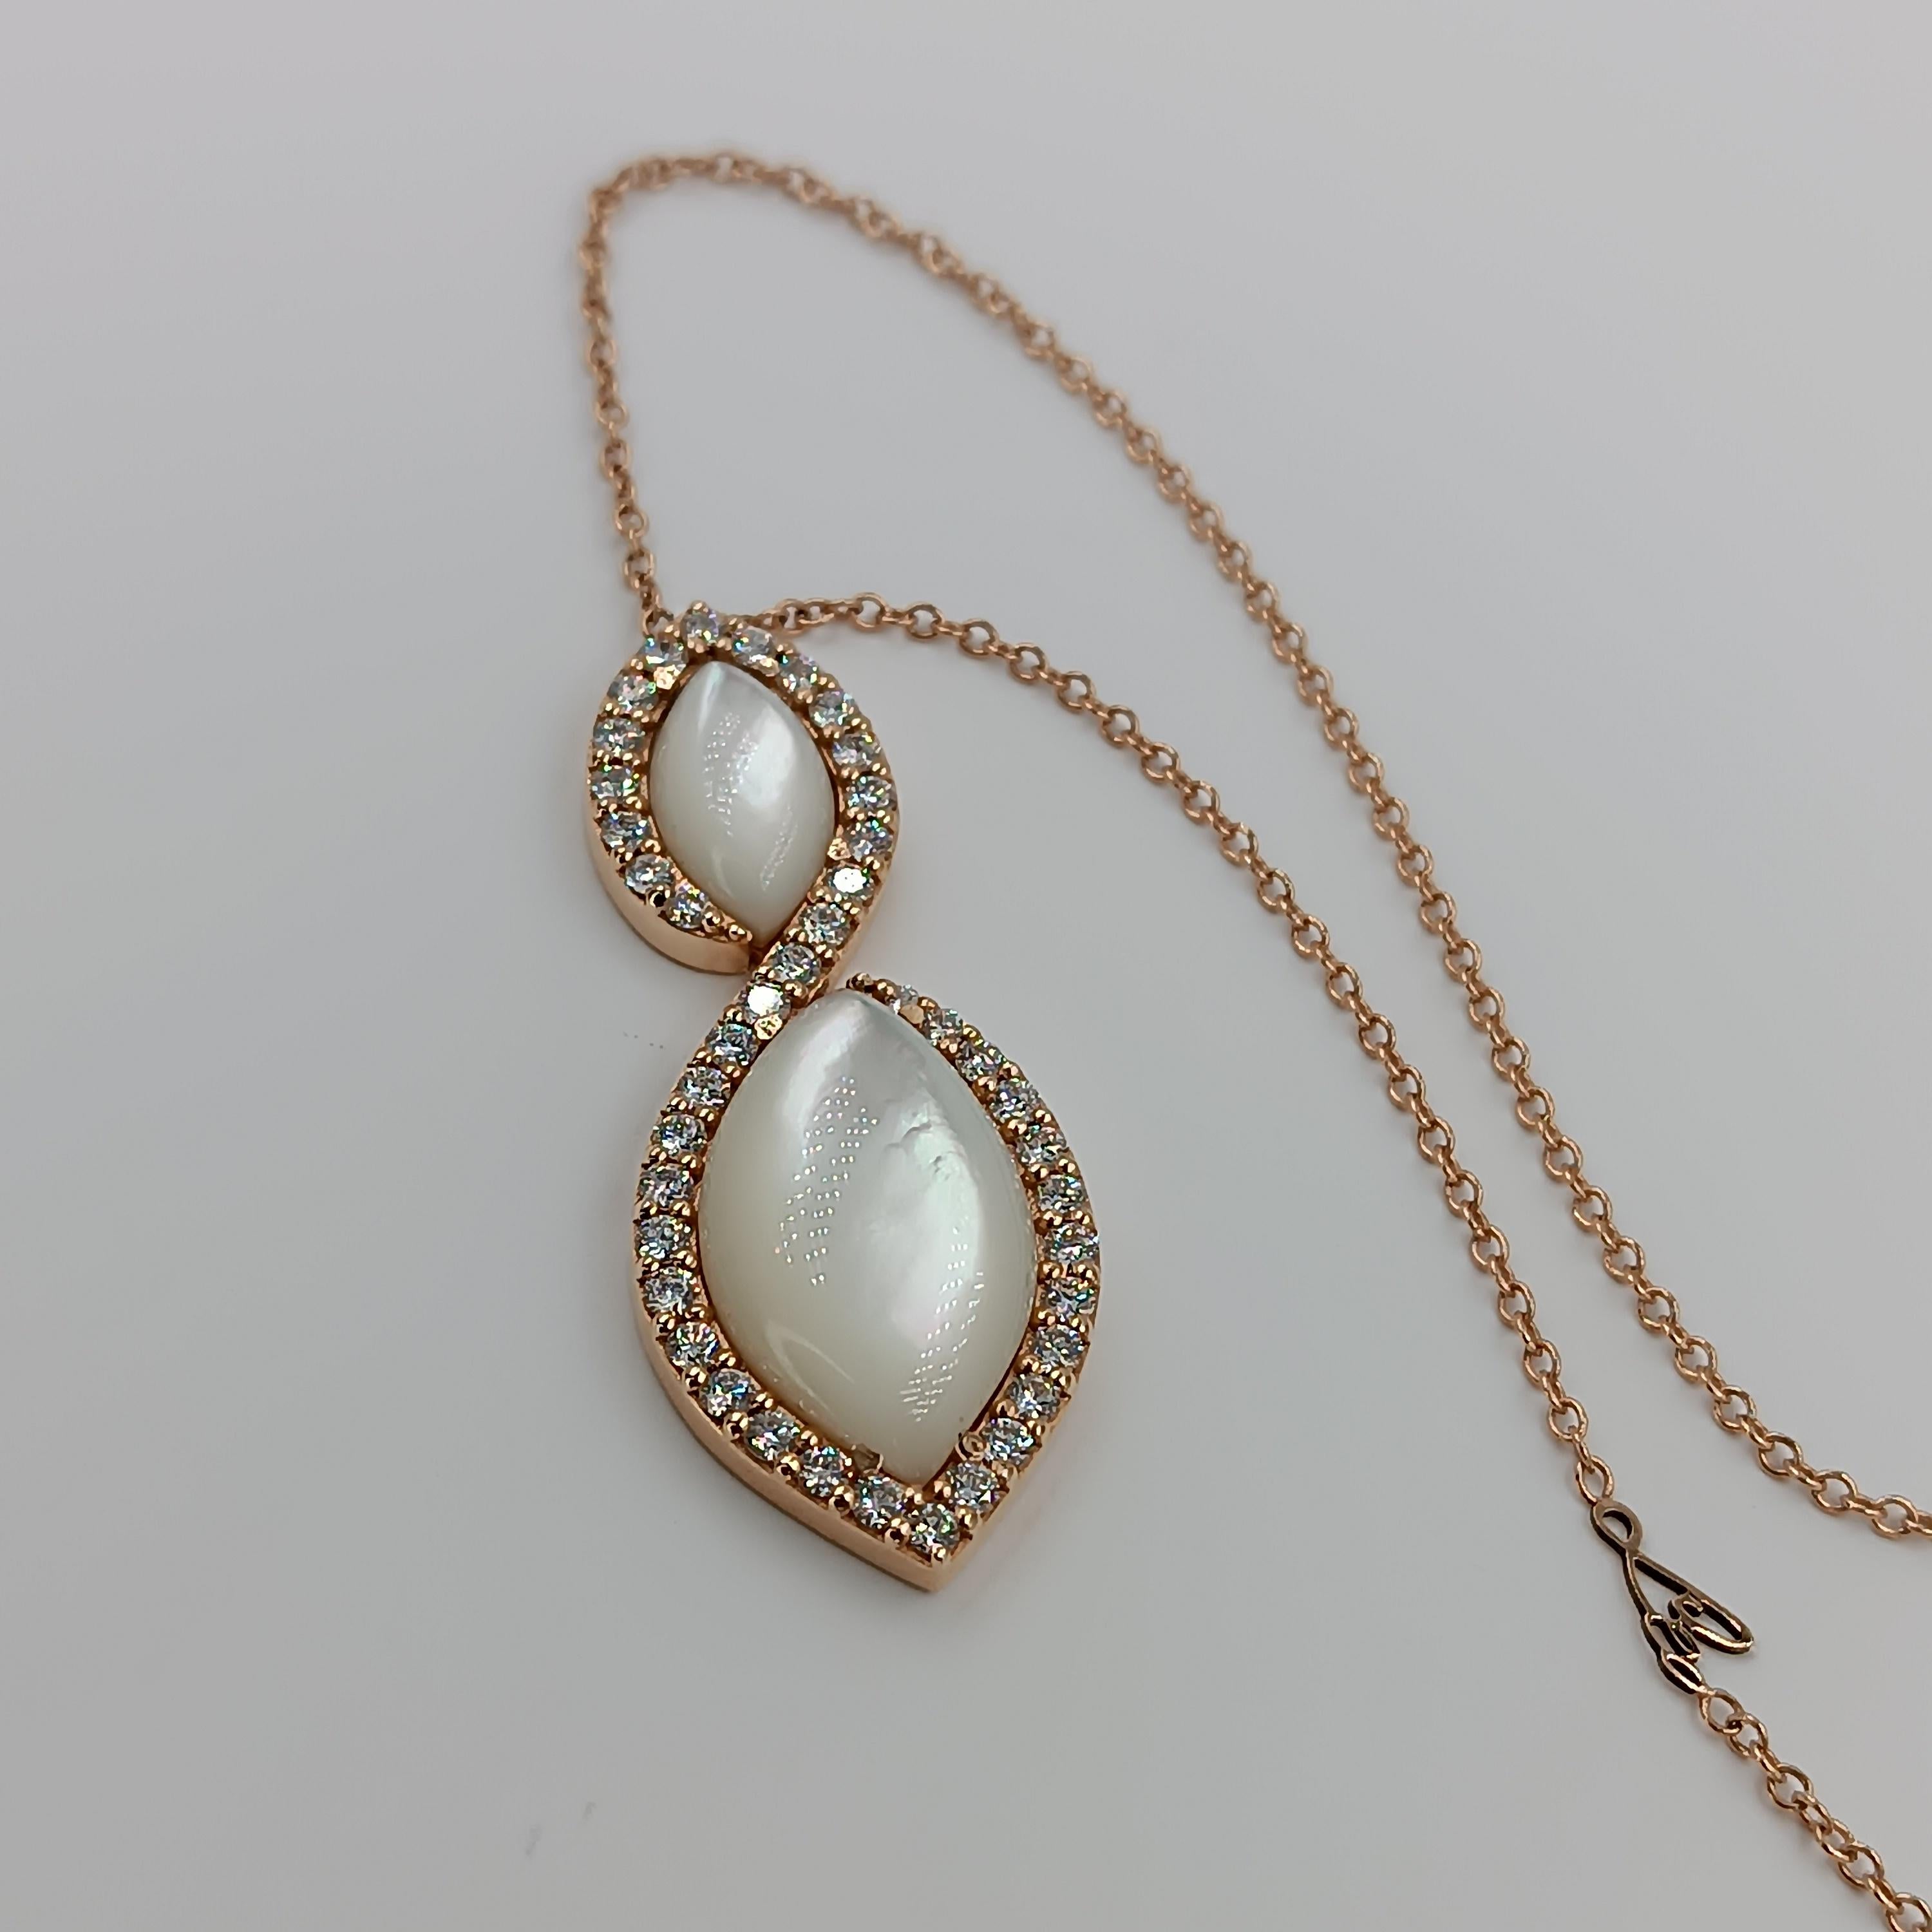 1.23 Carat Vs G Diamonds on 18 Carat Rose Gold with Mother of Pearl Pendant For Sale 3